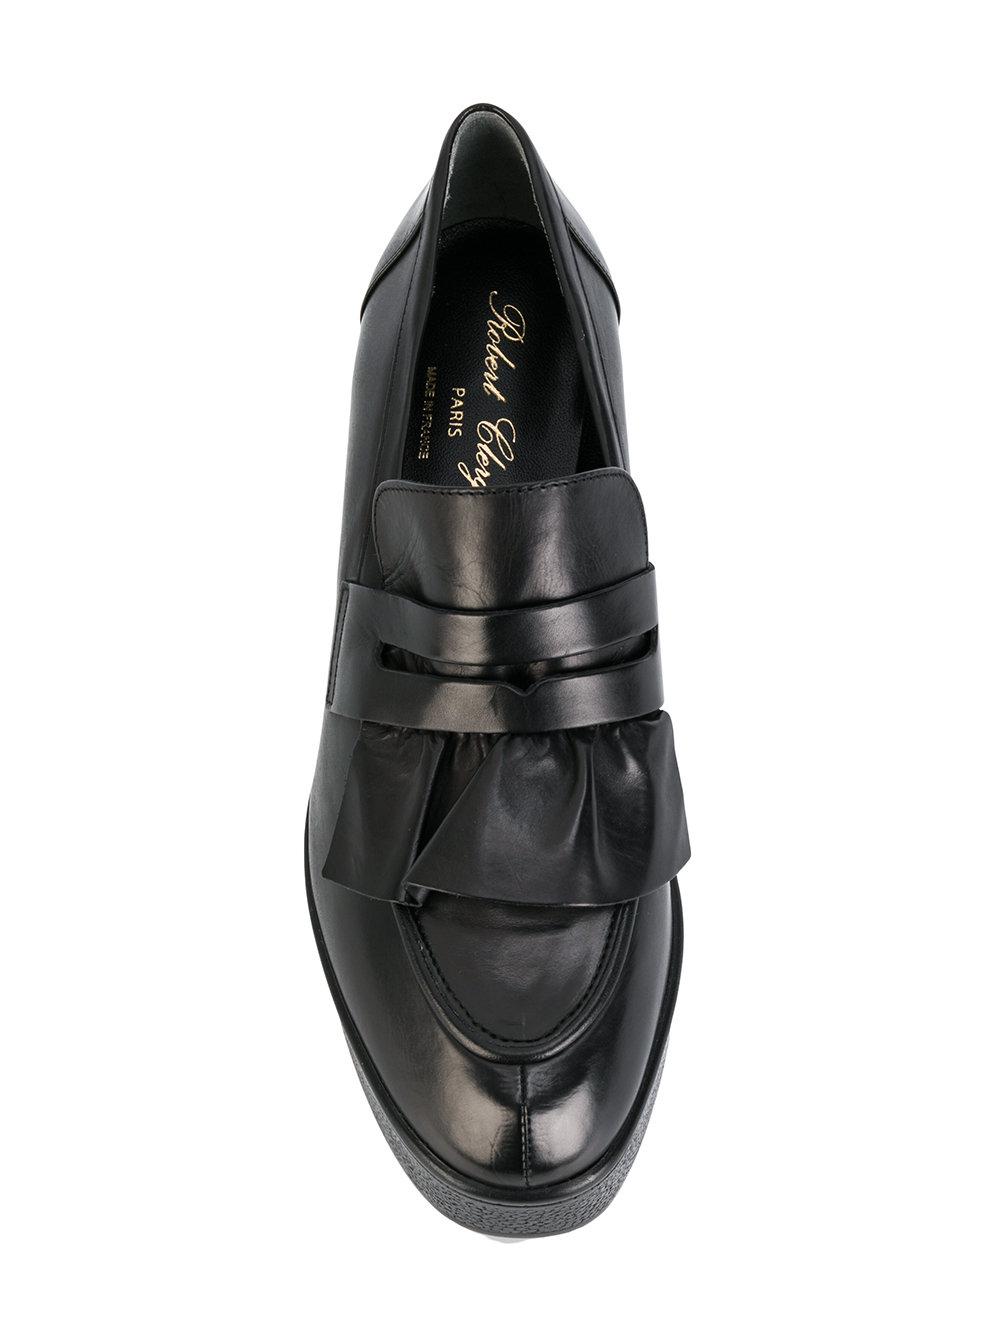 Robert Clergerie Leather Xock Platform Loafers in Black - Lyst